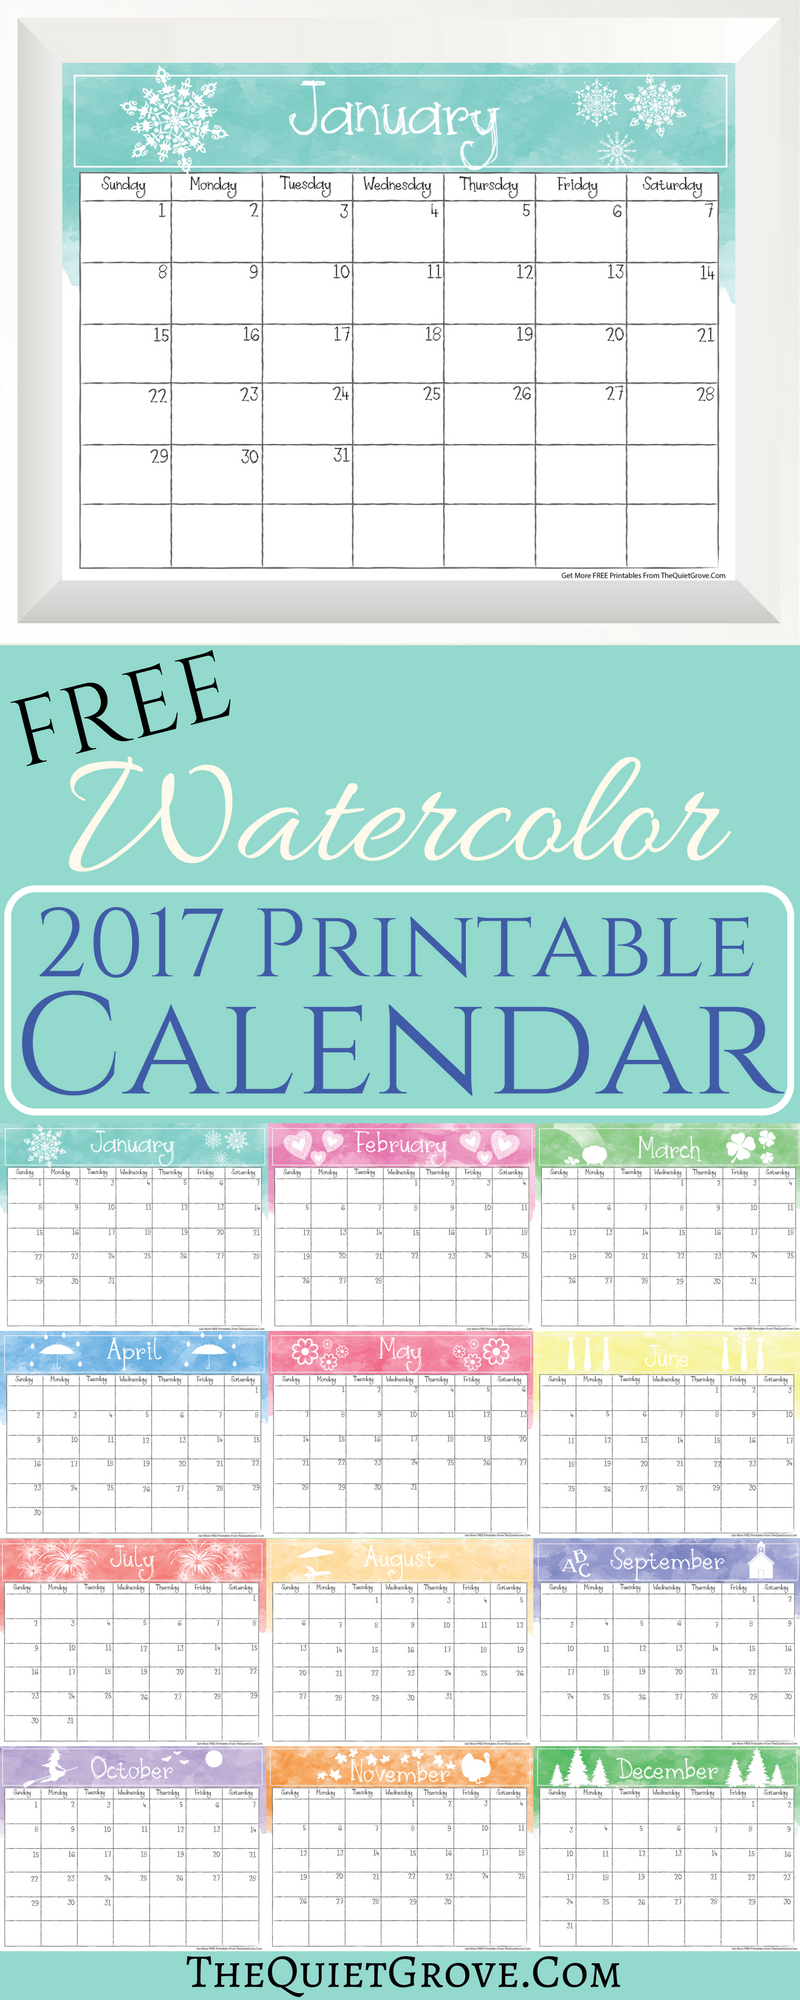 FREE 2017 Printable Calendars which you can print out a month at a time or all at once!